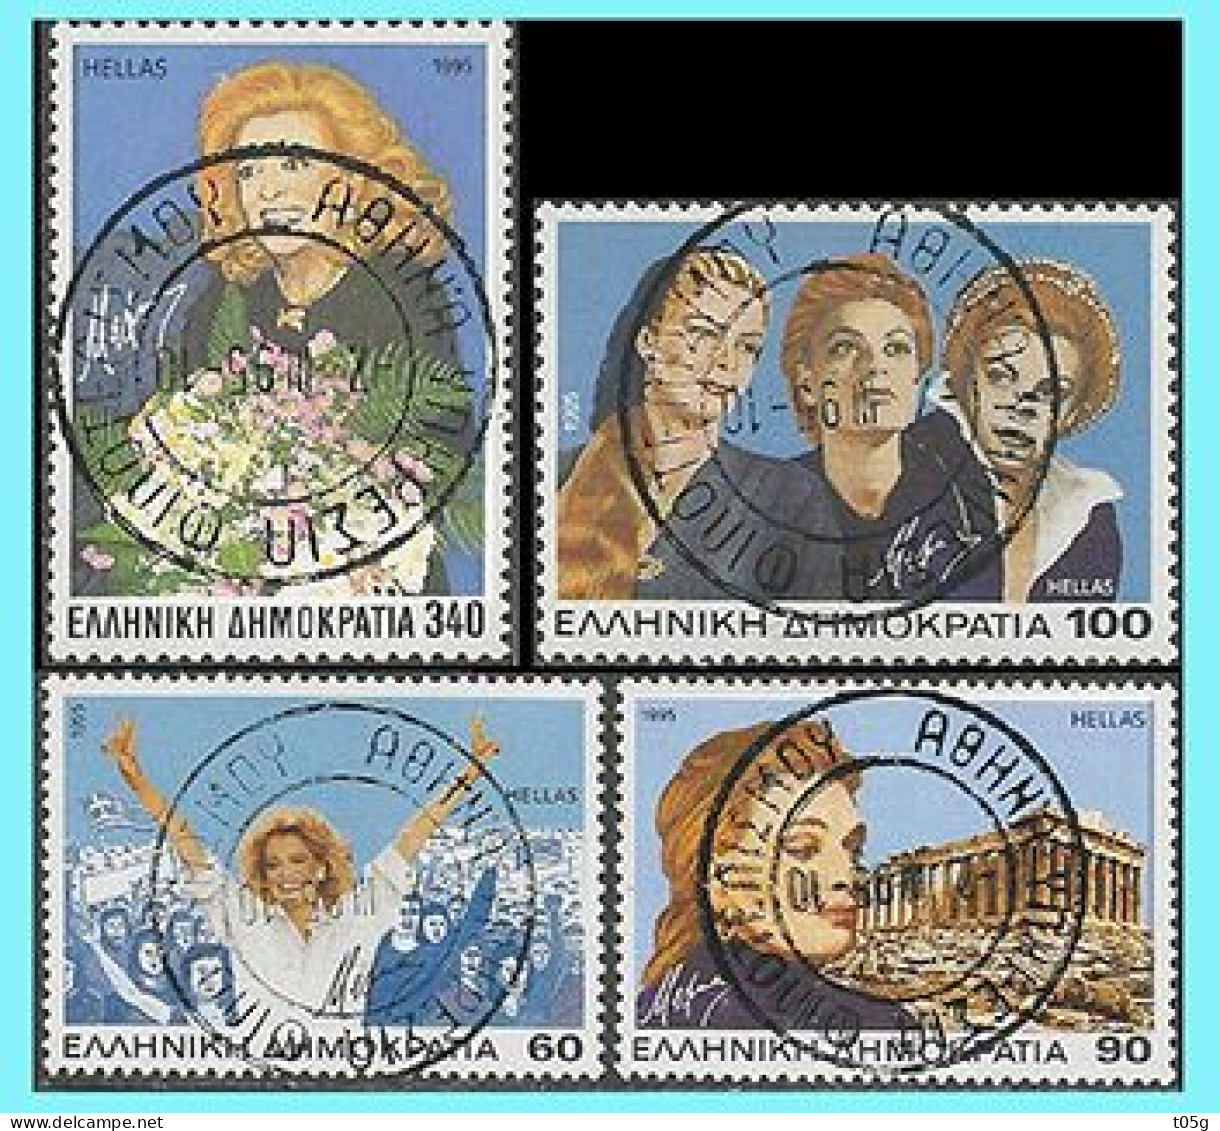 GREECE- GRECE - HELLAS 1995:  (7-III-95  1st First Day Of Issue) Melina Merkouri Compl. Set Used - Used Stamps